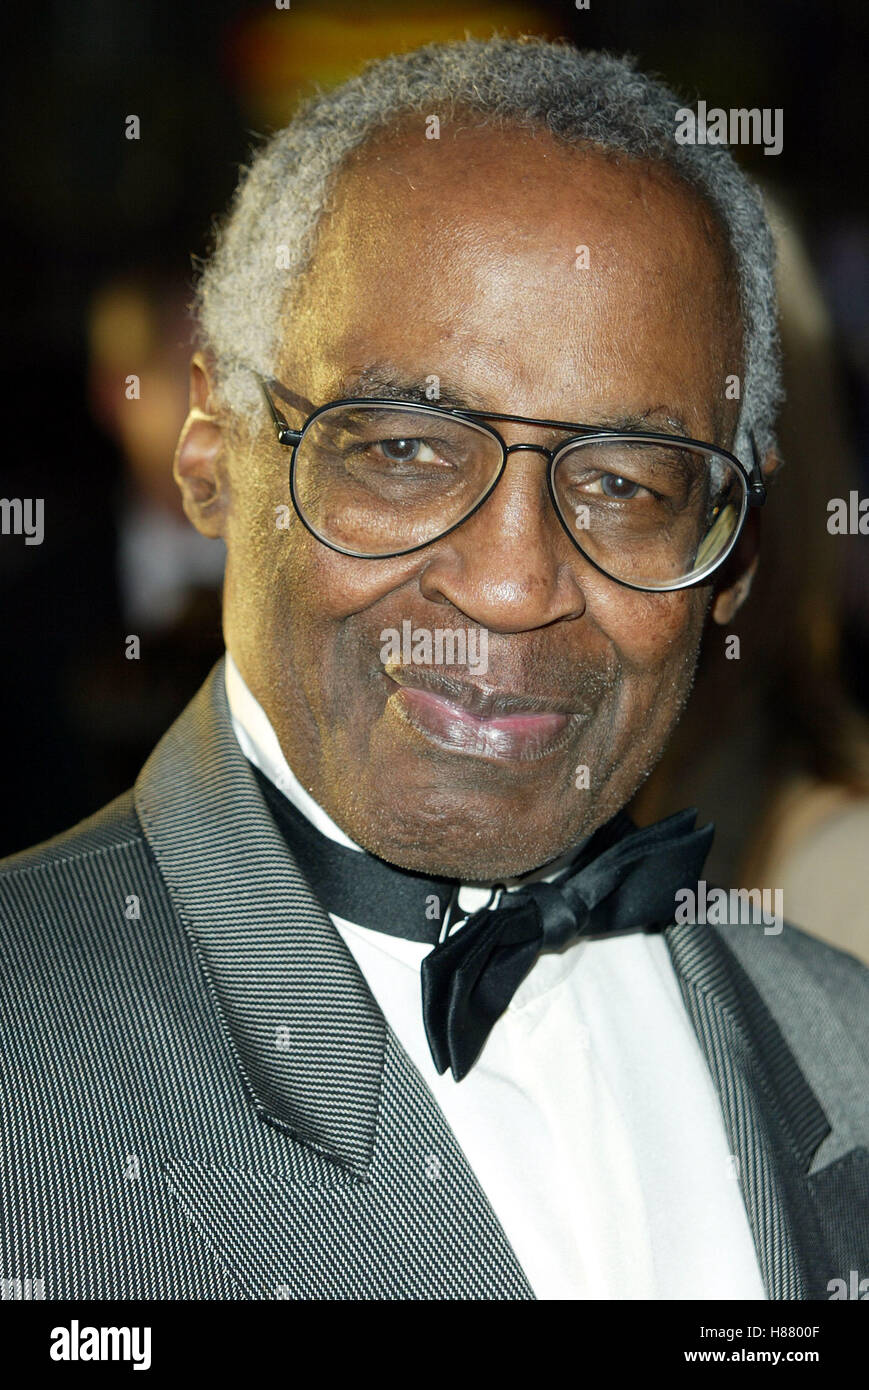 ROBERT GUILLAUME ABC TV 50TH ANNIVERSARY PANTAGES THEATRE HOLLYWOOD LA USA 16 March 2003 Stock Photo